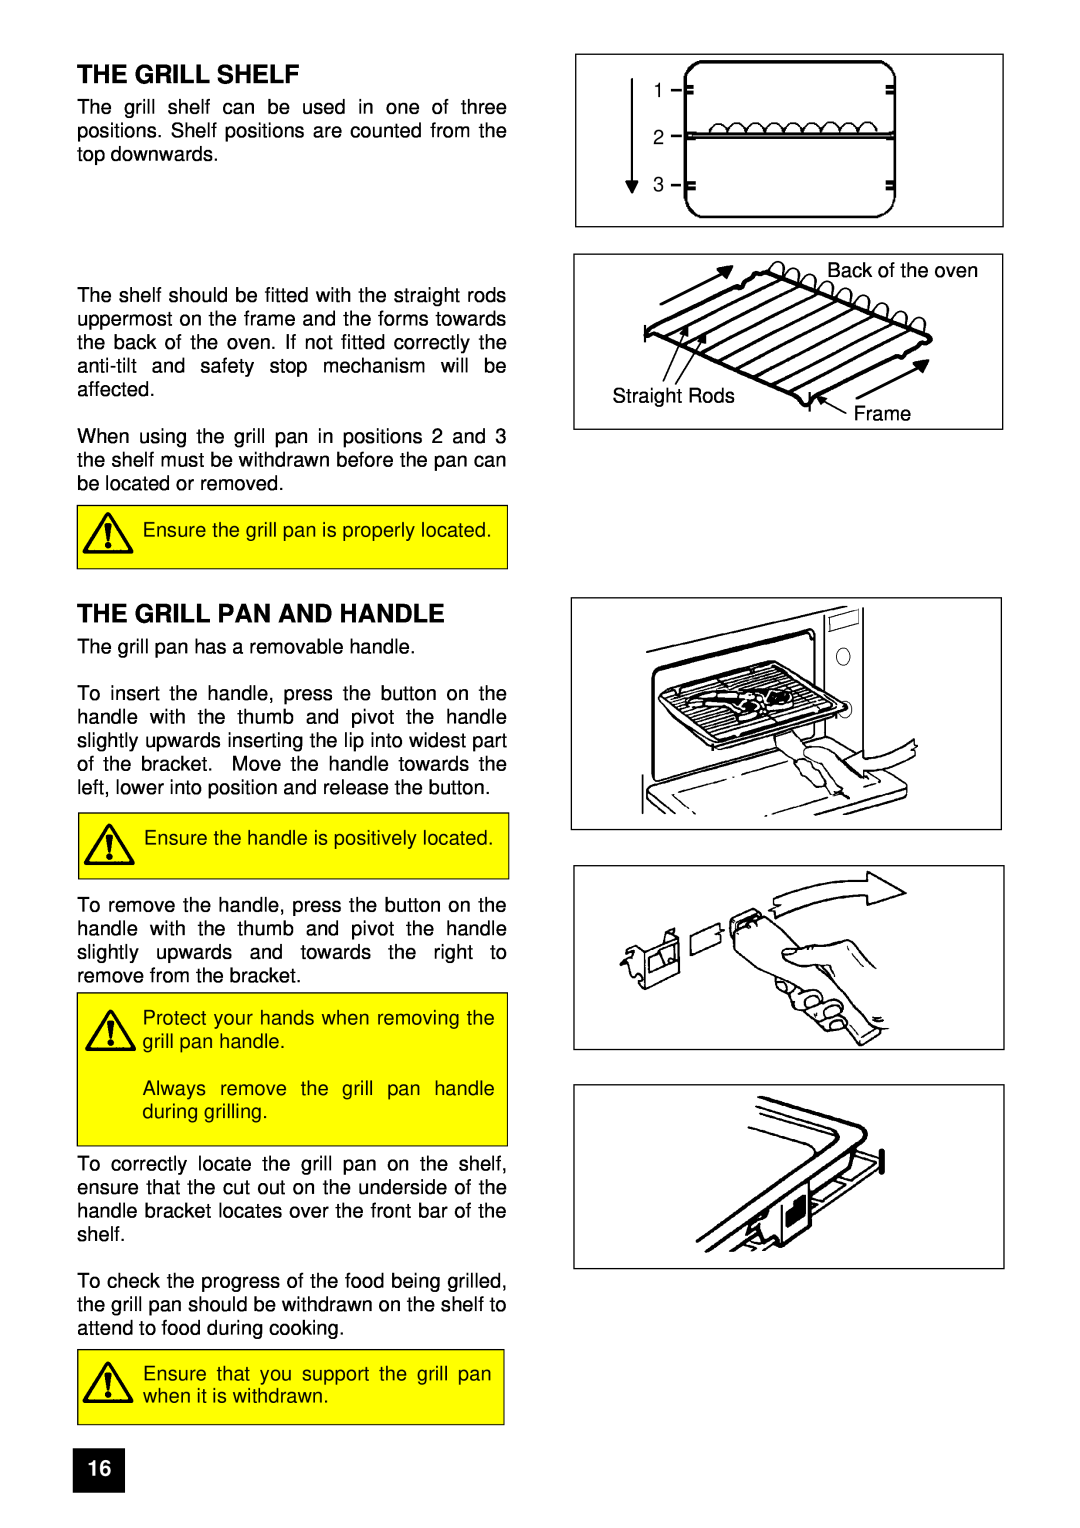 Zanussi ZUG 78 manual The Grill Shelf, The Grill Pan And Handle 